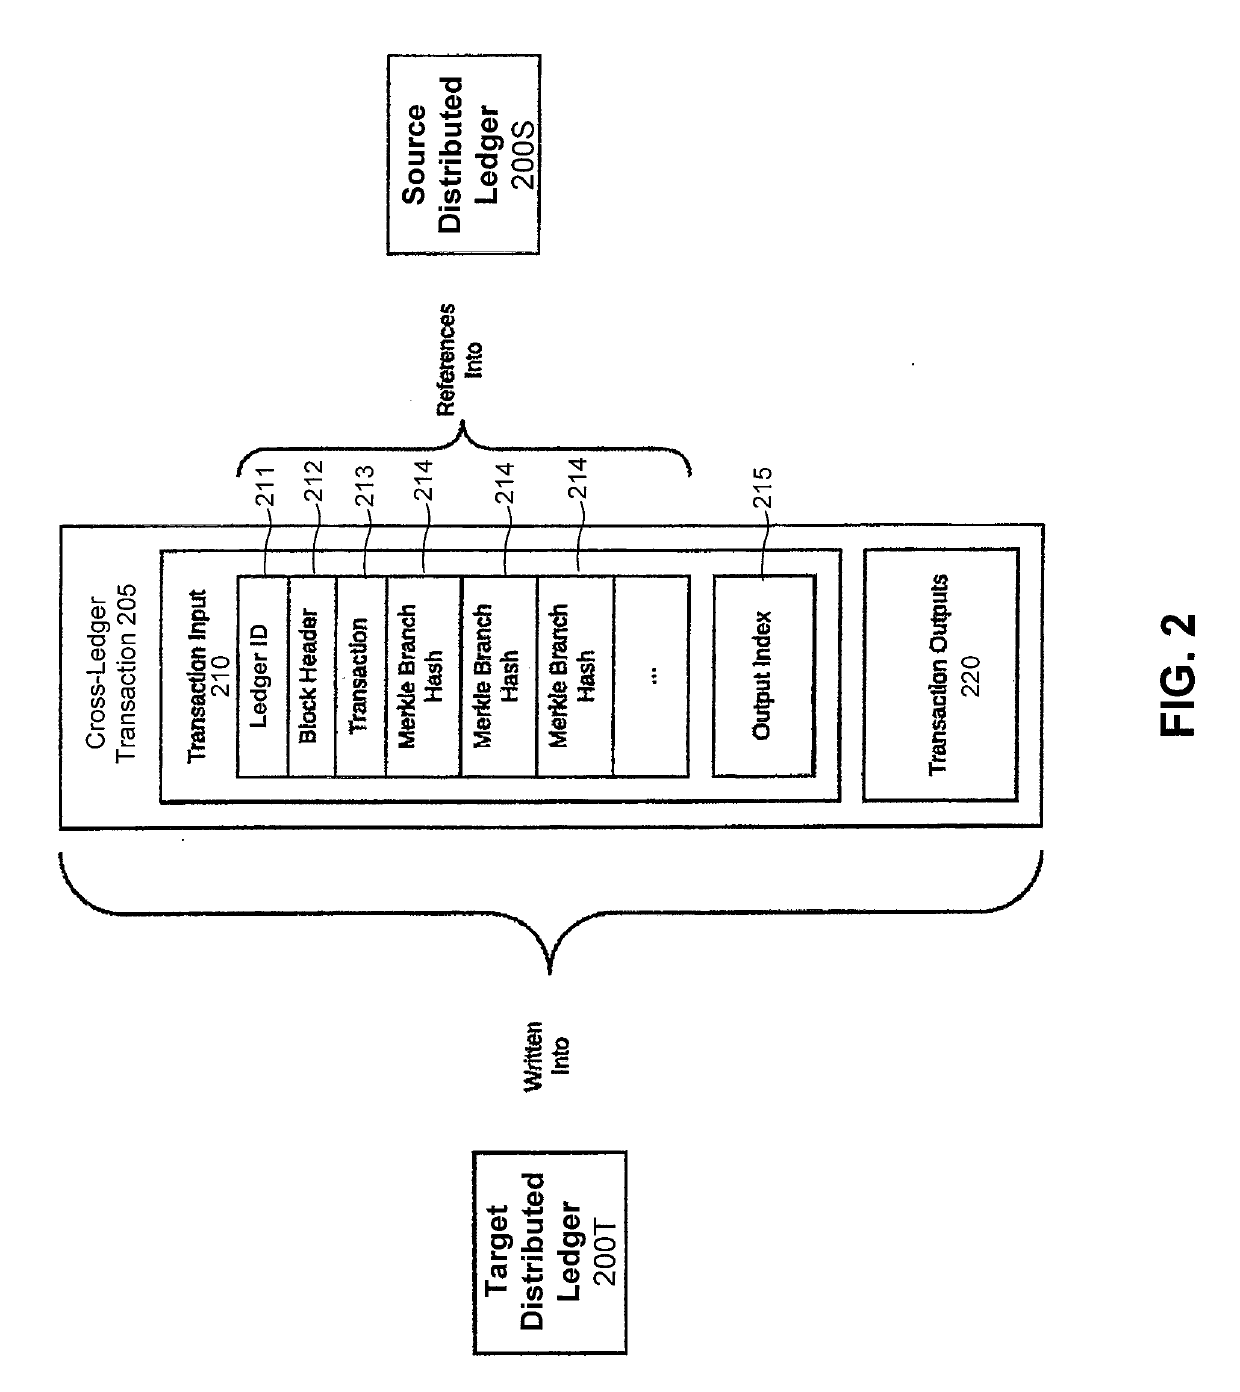 Systems of multiple distributed ledgers using cross-ledger transfers for highly-scalable transaction throughput